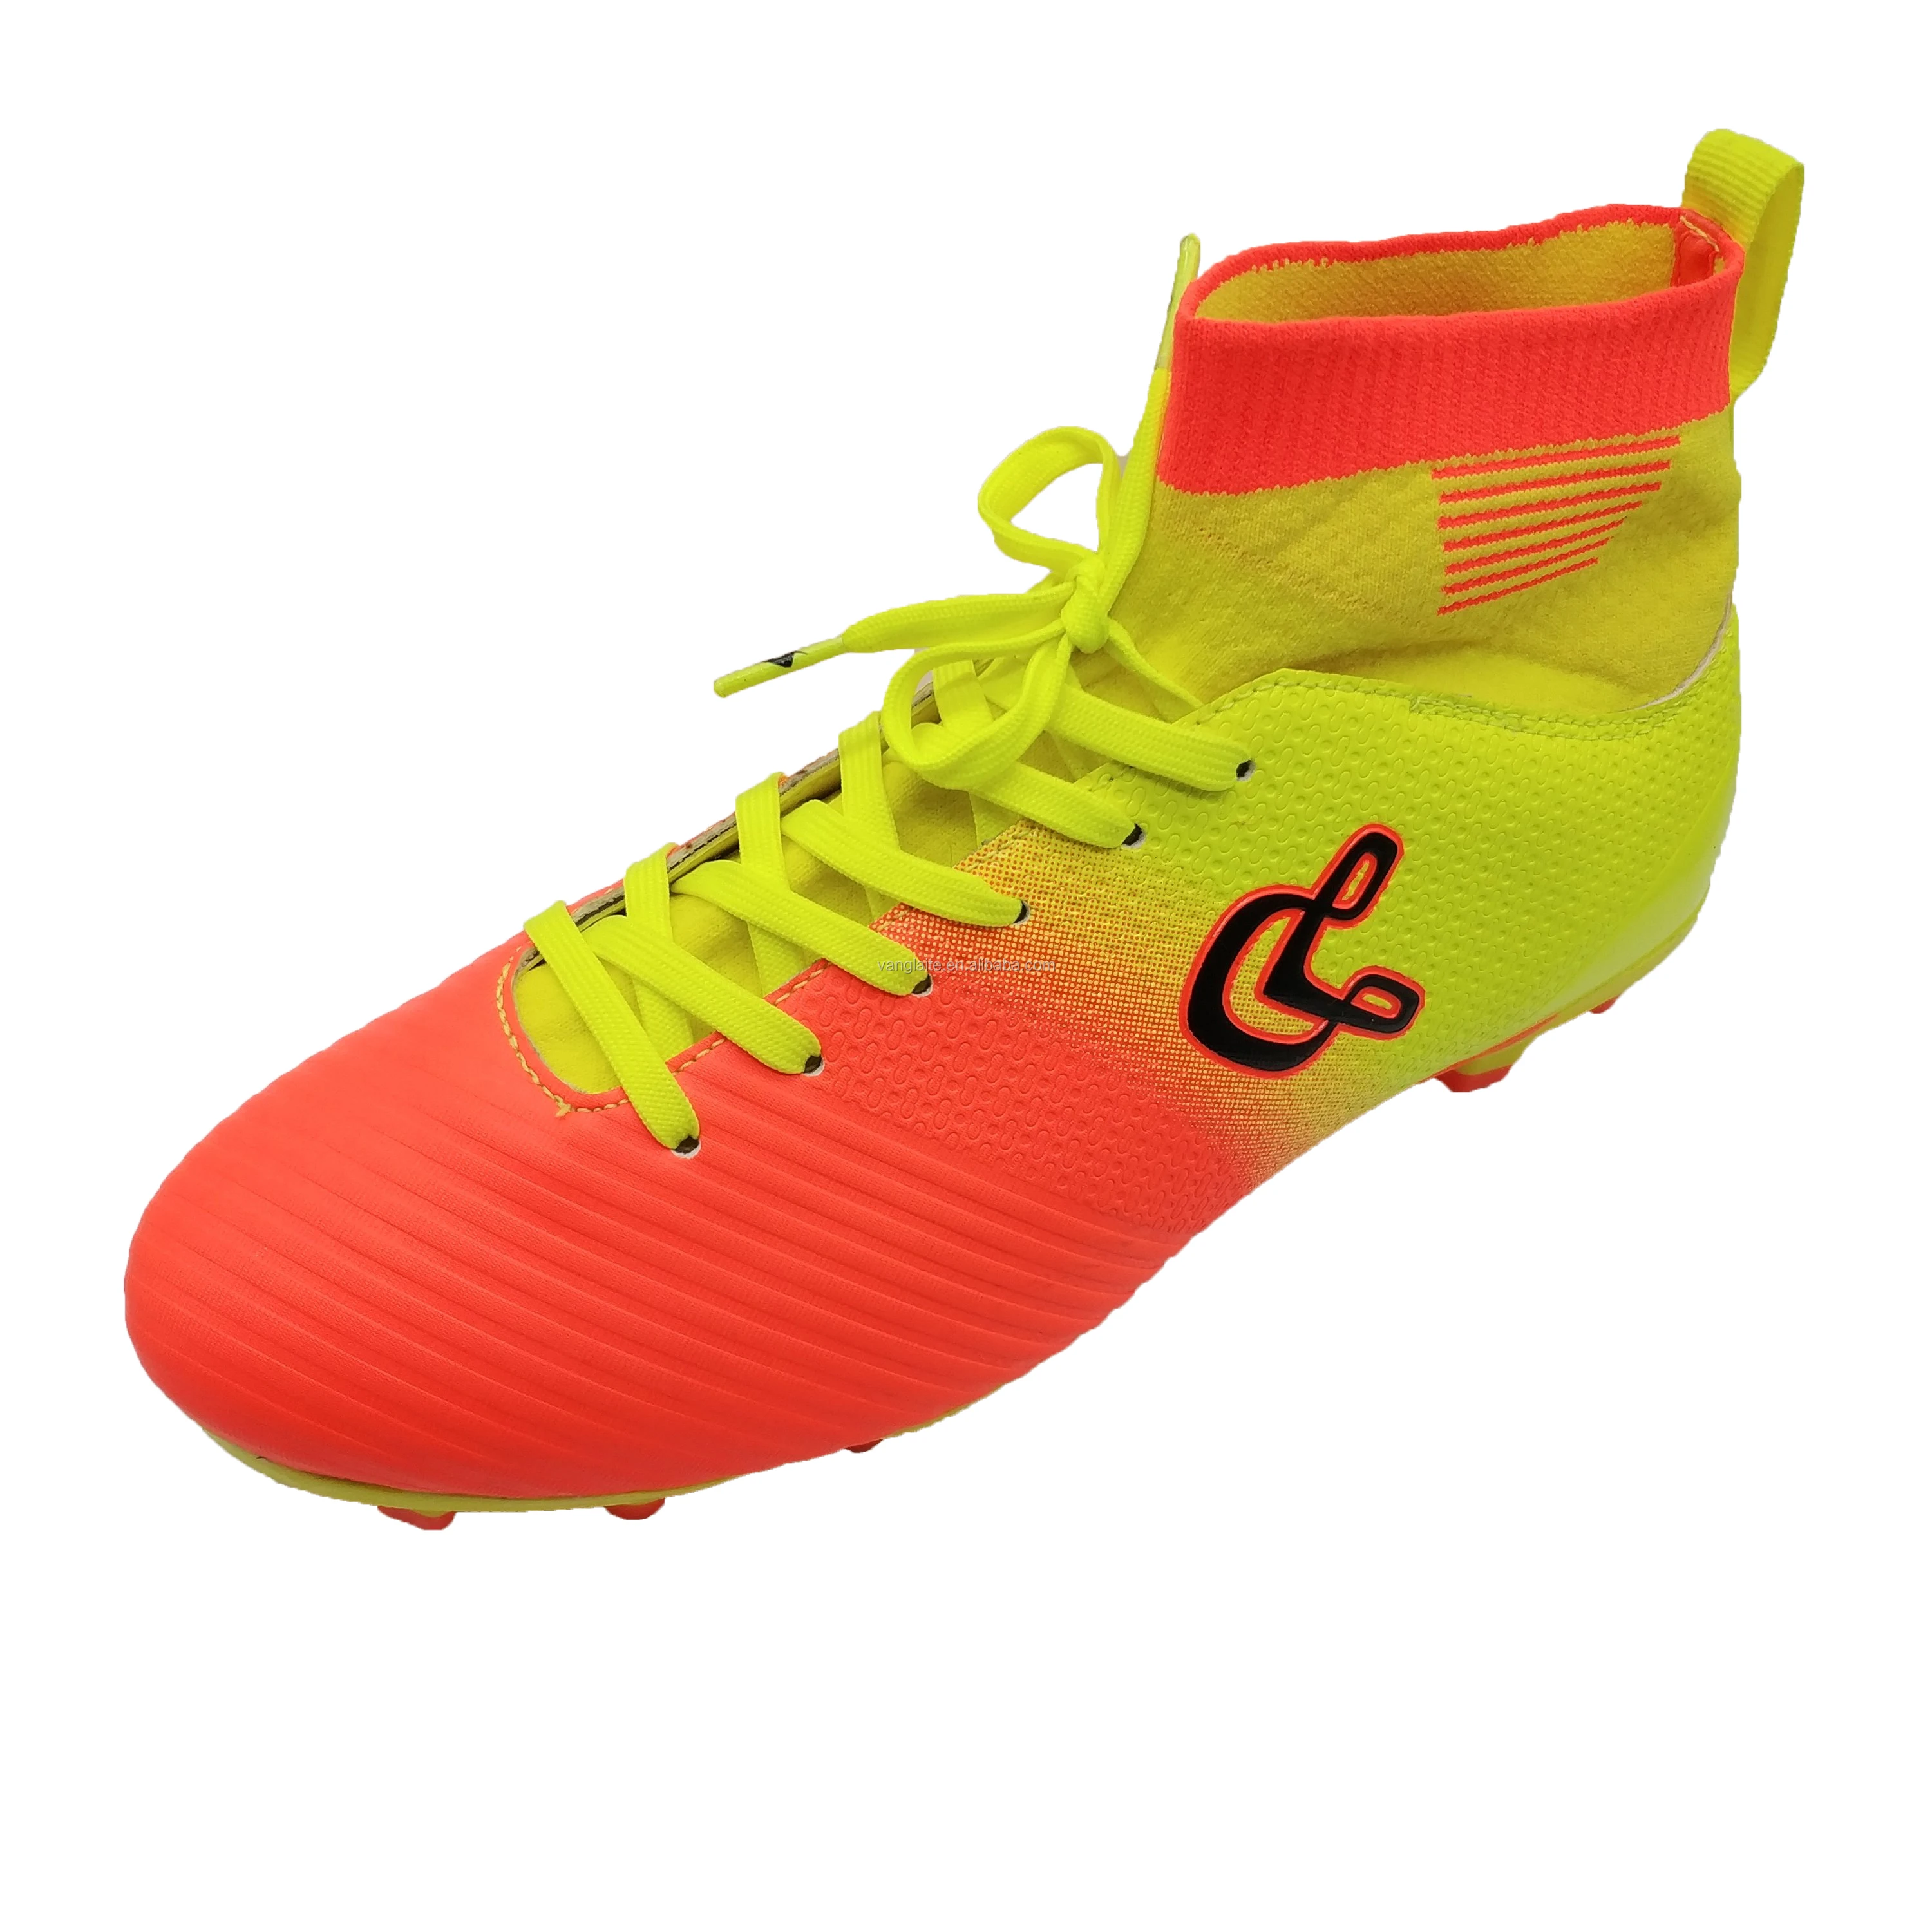 Athletic Professional Custom Factory Design Soccer Shoes Football Boots